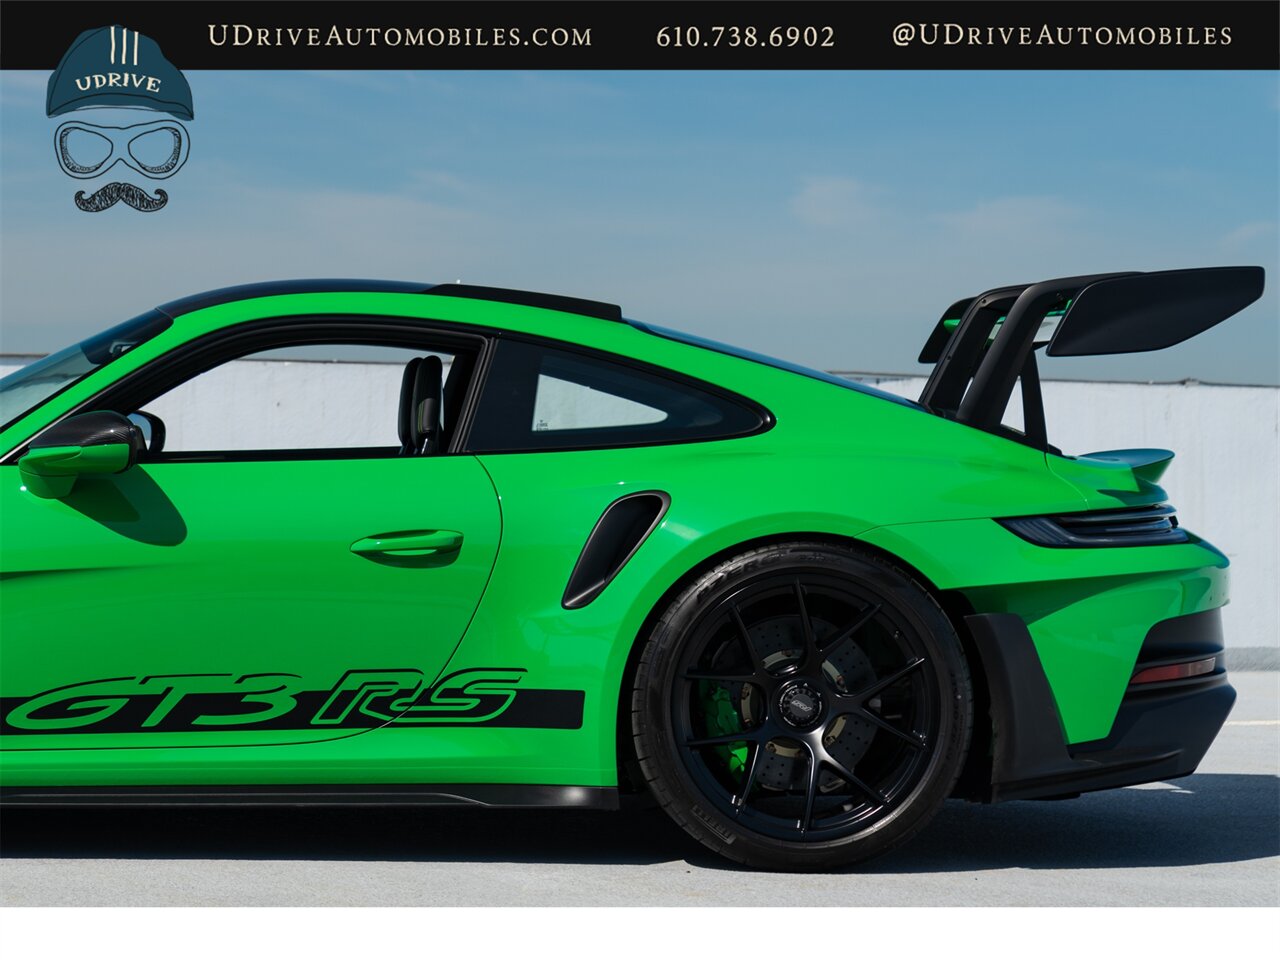 2023 Porsche 911 GT3 RS  Weissach Pkg FAL Full Body PPF $43k in Extras - Photo 35 - West Chester, PA 19382